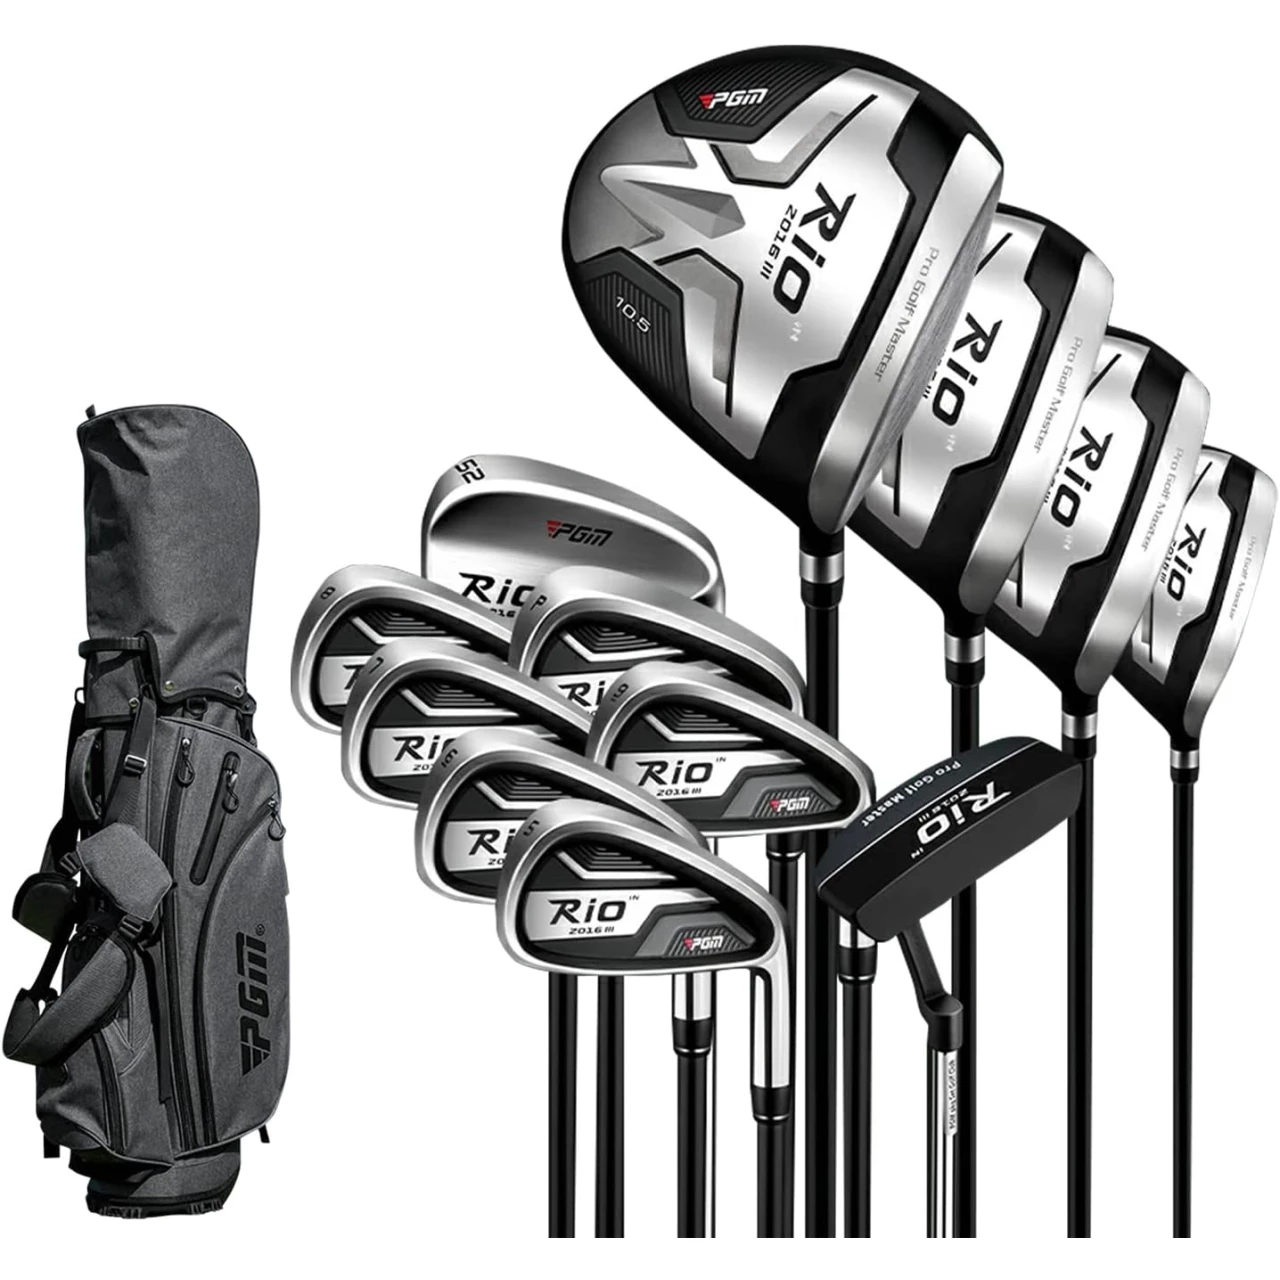 PGM Men&rsquo;s Complete Golf Club Sets - 12 Pieces - 3 Wood (#1,3,5), 1 Hybrid (#4H), 6 Irons(#5,6,7,8,9,PW), 1 Sand Wedge (52°), 1 Putter - Golf Stand Bag - Titanium Club Head, Graptlite Shaft